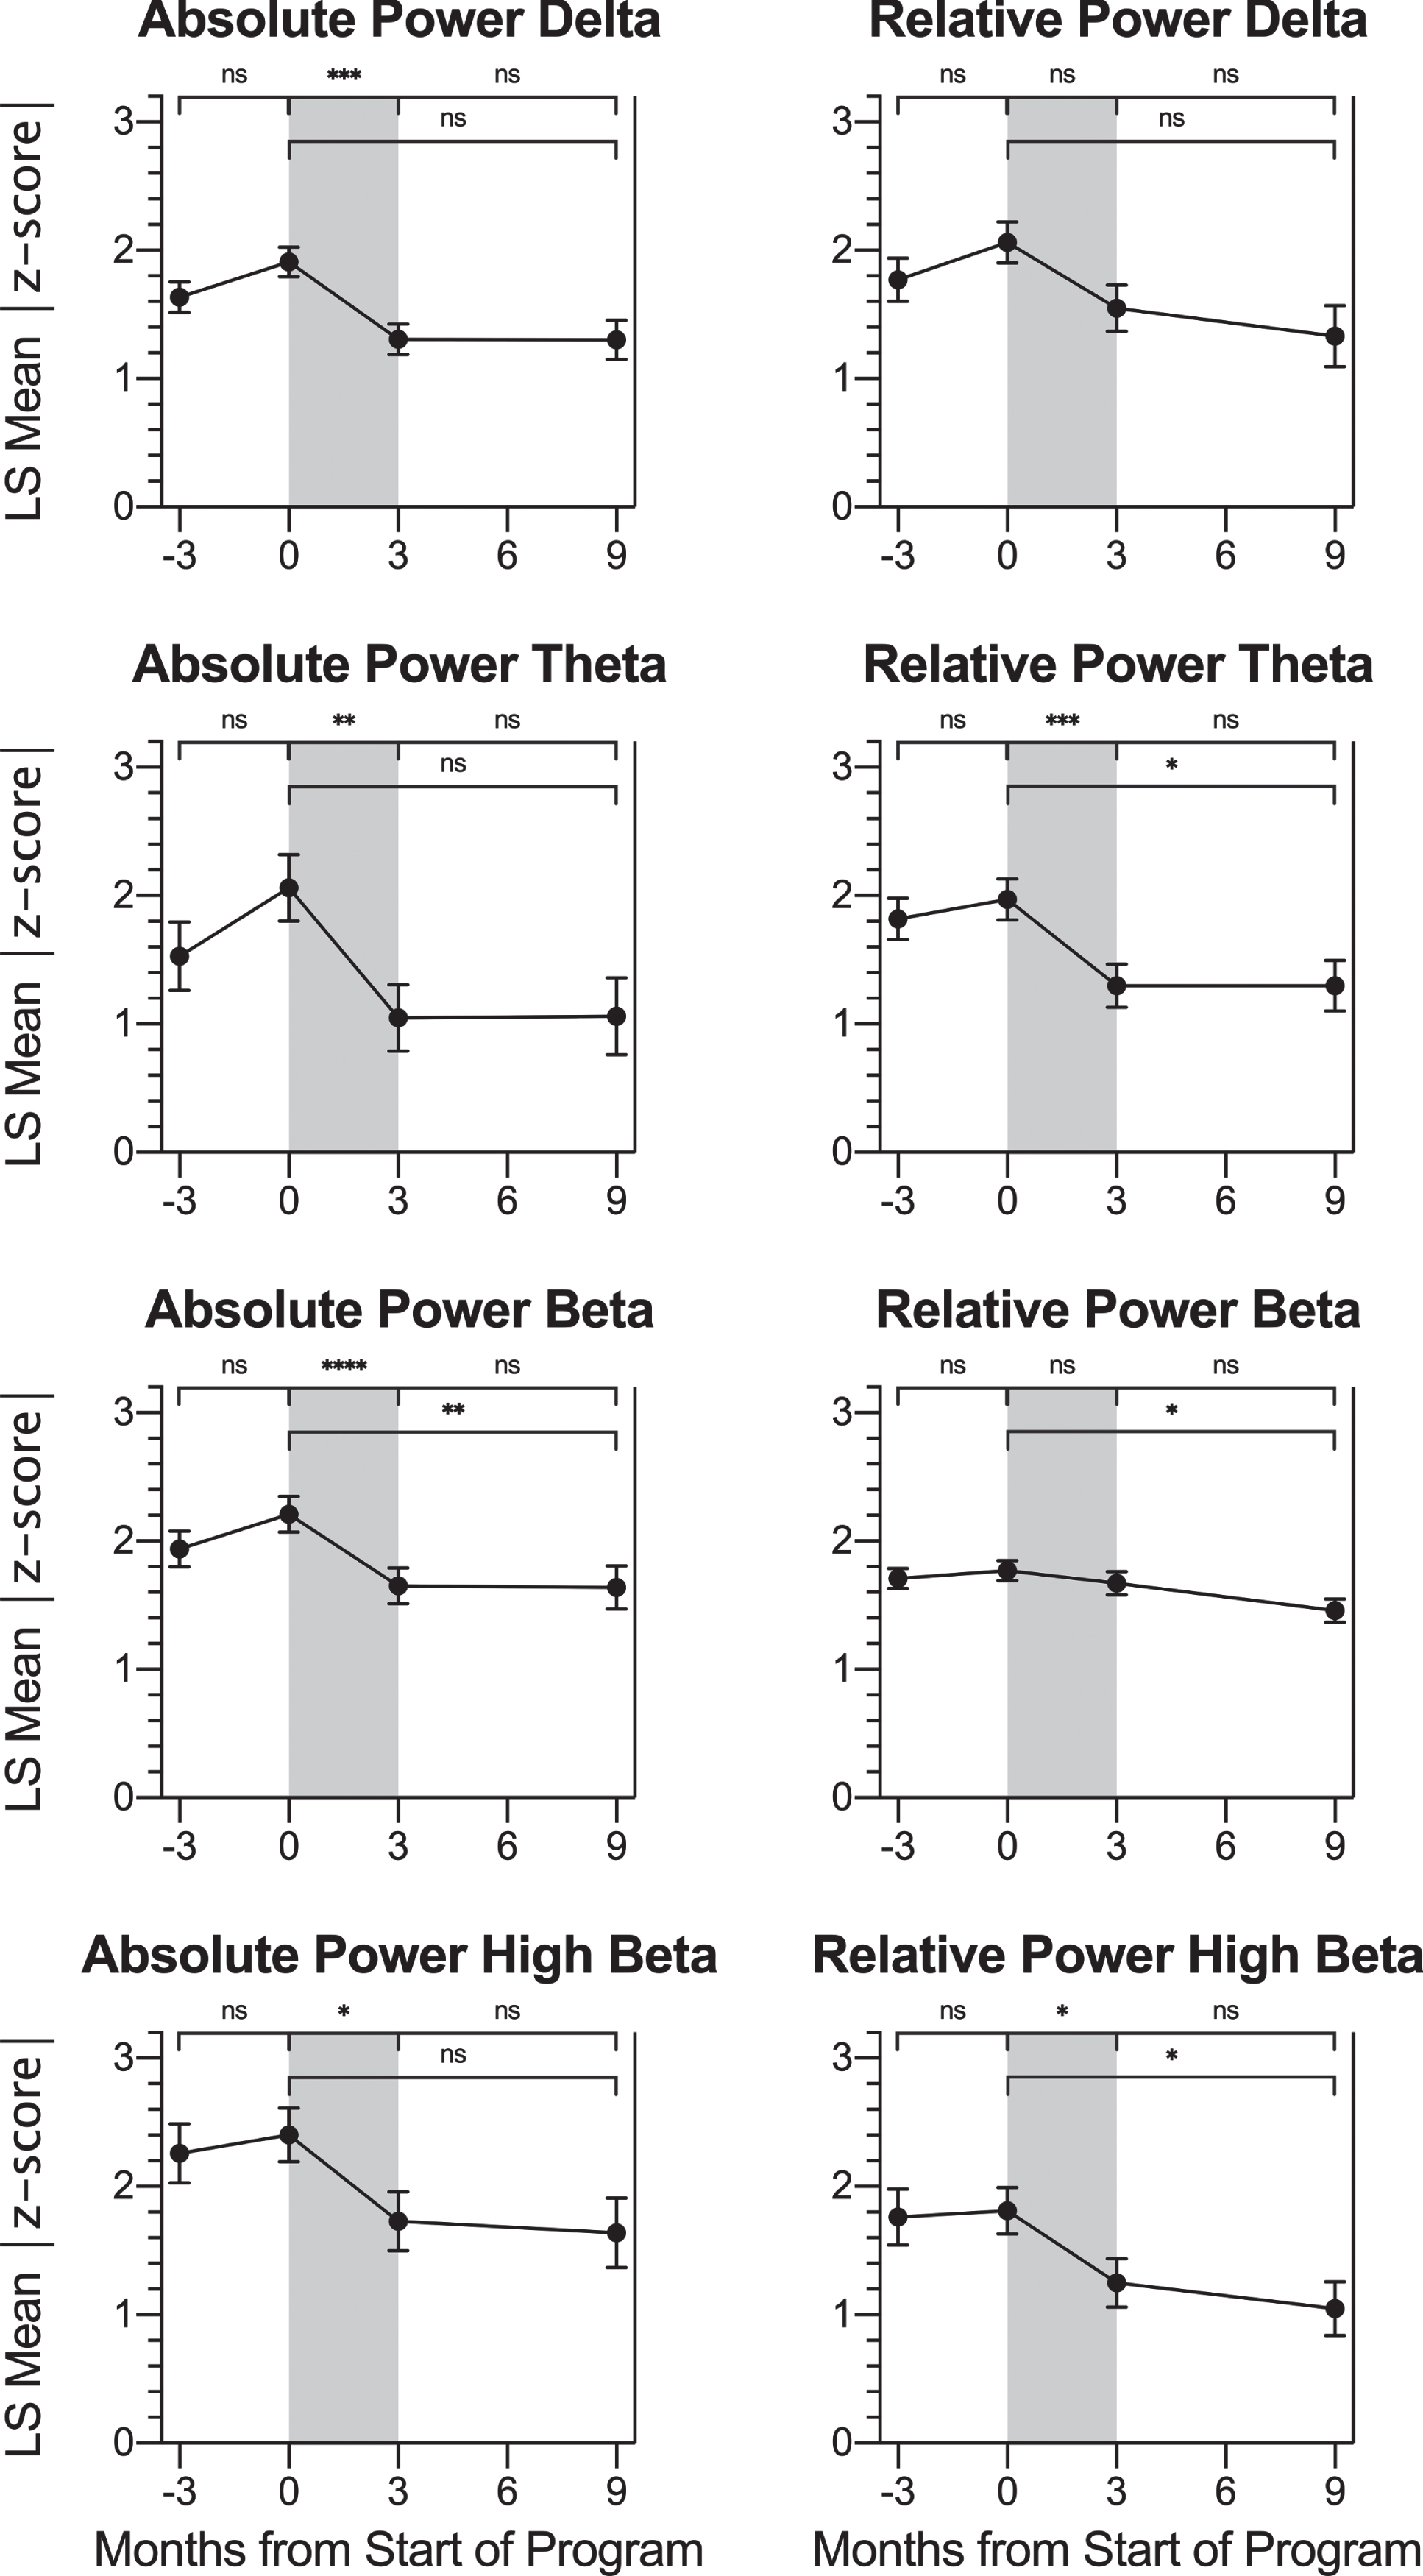 Change in QEEG Metrics across Timepoints. For participants with SOIs at trained sites, LS mean |z-score| values at each timepoint: -3 months (baseline assessment), 0 months (pre-treatment assessment), 3 months (post-treatment assessment) and 9 months (follow-up assessment) are shown for the QEEG parameters absolute power and relative power percent for the frequency bands delta, theta, beta, and high beta. Pairwise LS mean change values between timepoints are summarized in the top of each graph (values from Table 4). There was no change in |z-score| over the control or follow-up period for any parameter. For absolute power of delta, absolute power of theta, relative power of theta, absolute power of beta, absolute power of high beta, and relative power of high beta, there was a significant decrease (improvement) in |z-score| over the treatment period (gray shading). Error bars represent the standard error. ns: p > 0.0125, change not significant at the Bonferroni-corrected significance level. * p≤0.0125. ** p≤0.008. *** p≤0.001. **** p≤0.0001.